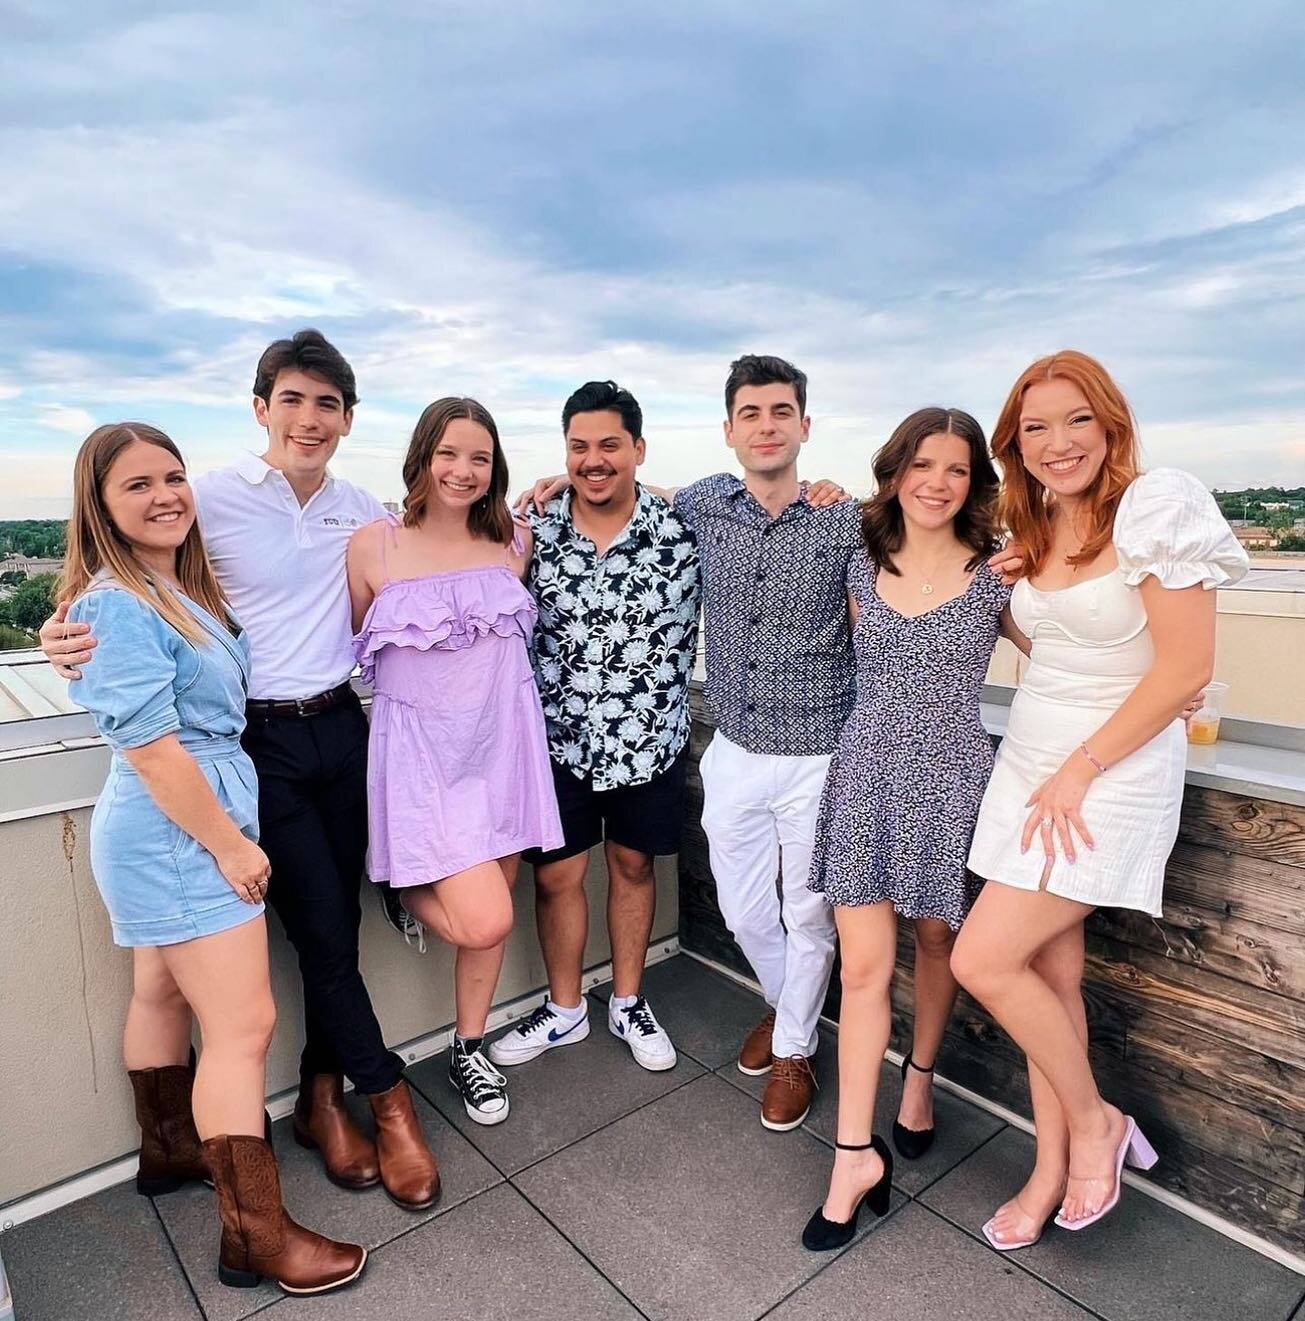 Friends, views, and rooftop fun &mdash; it doesn't get much better than a Sunday spent sipping drinks with great company! 🥂 #SundayFunday 

📸: @alicianoelnolley